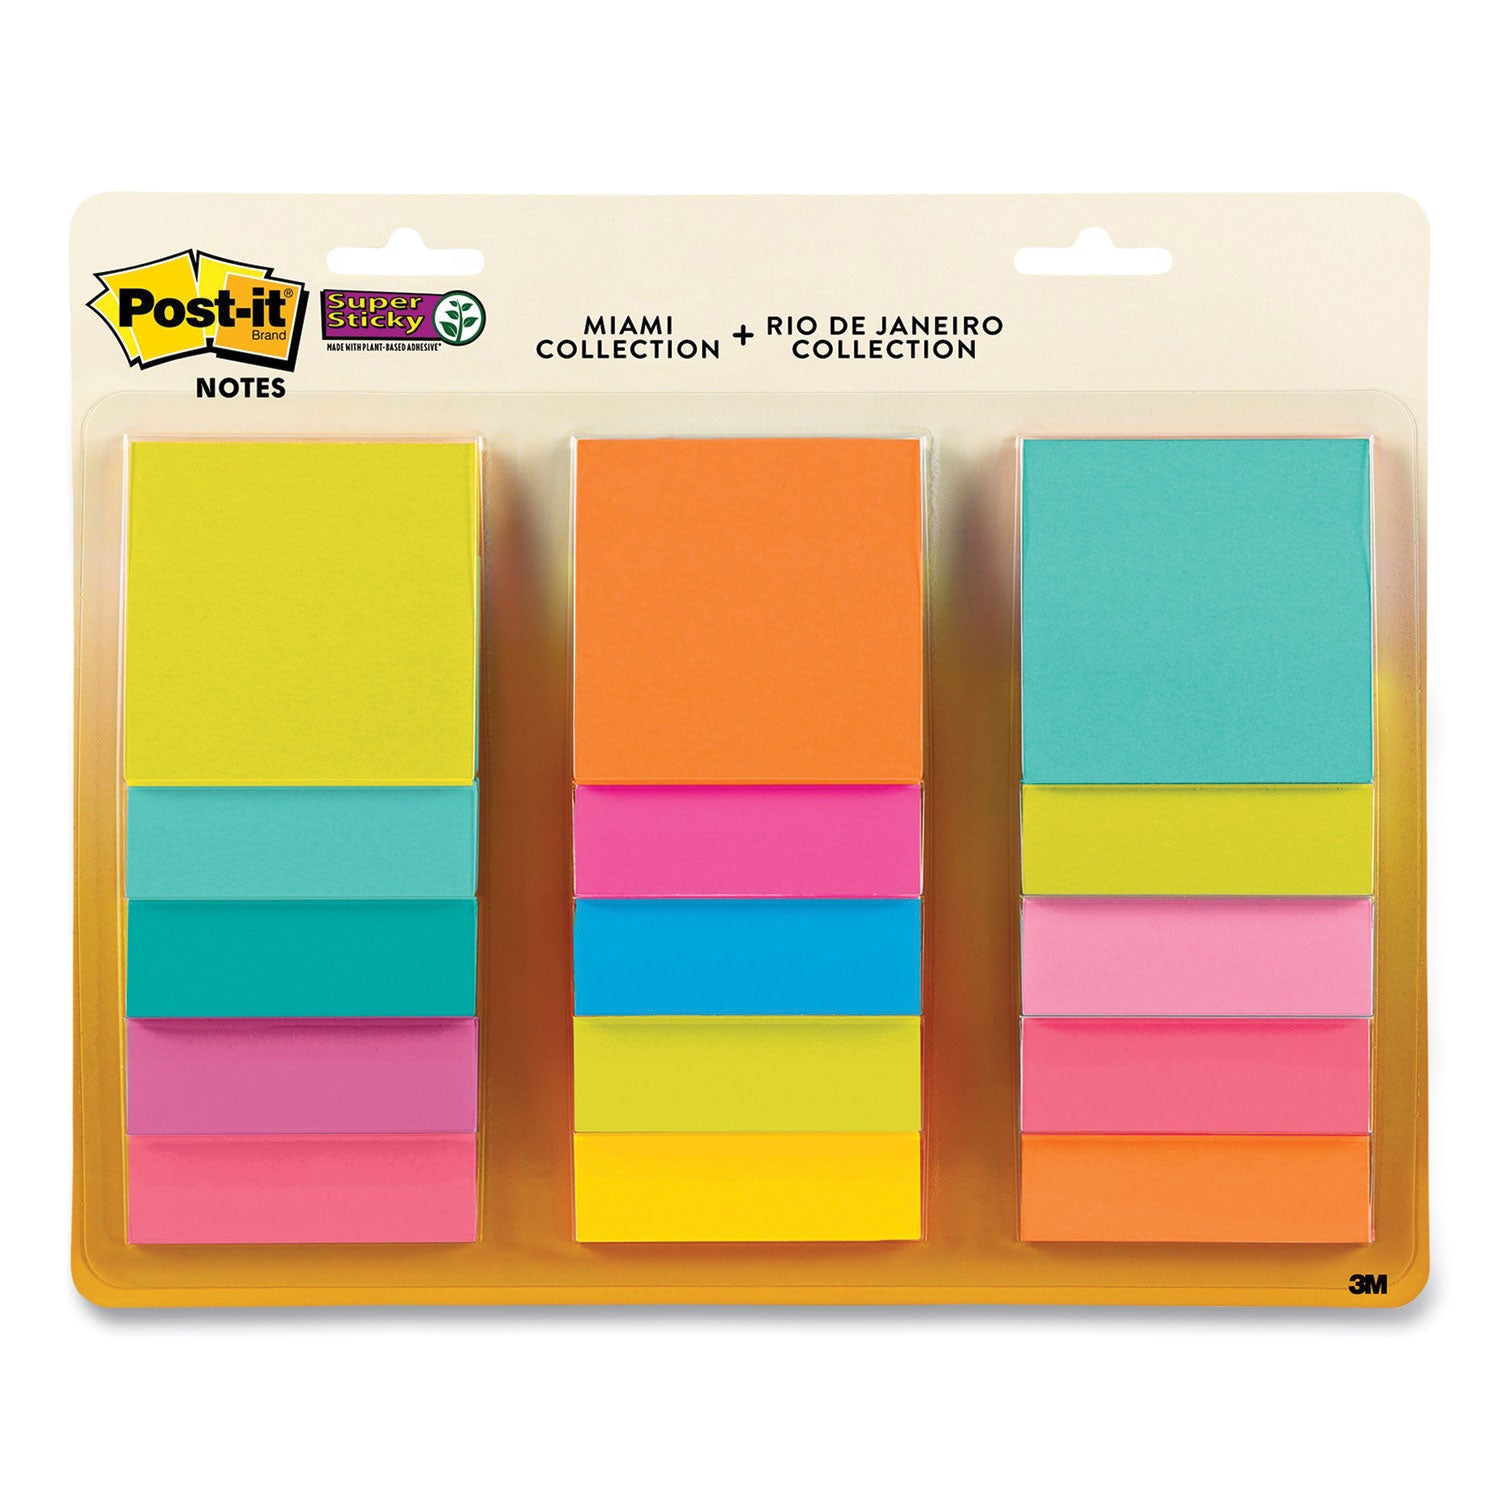 pad-collection-assortment-pack-3-x-3-energy-boost-and-supernova-neon-color-collections-45-sheets-pad-15-pads-pack_mmm65415ssmlti2 - 2